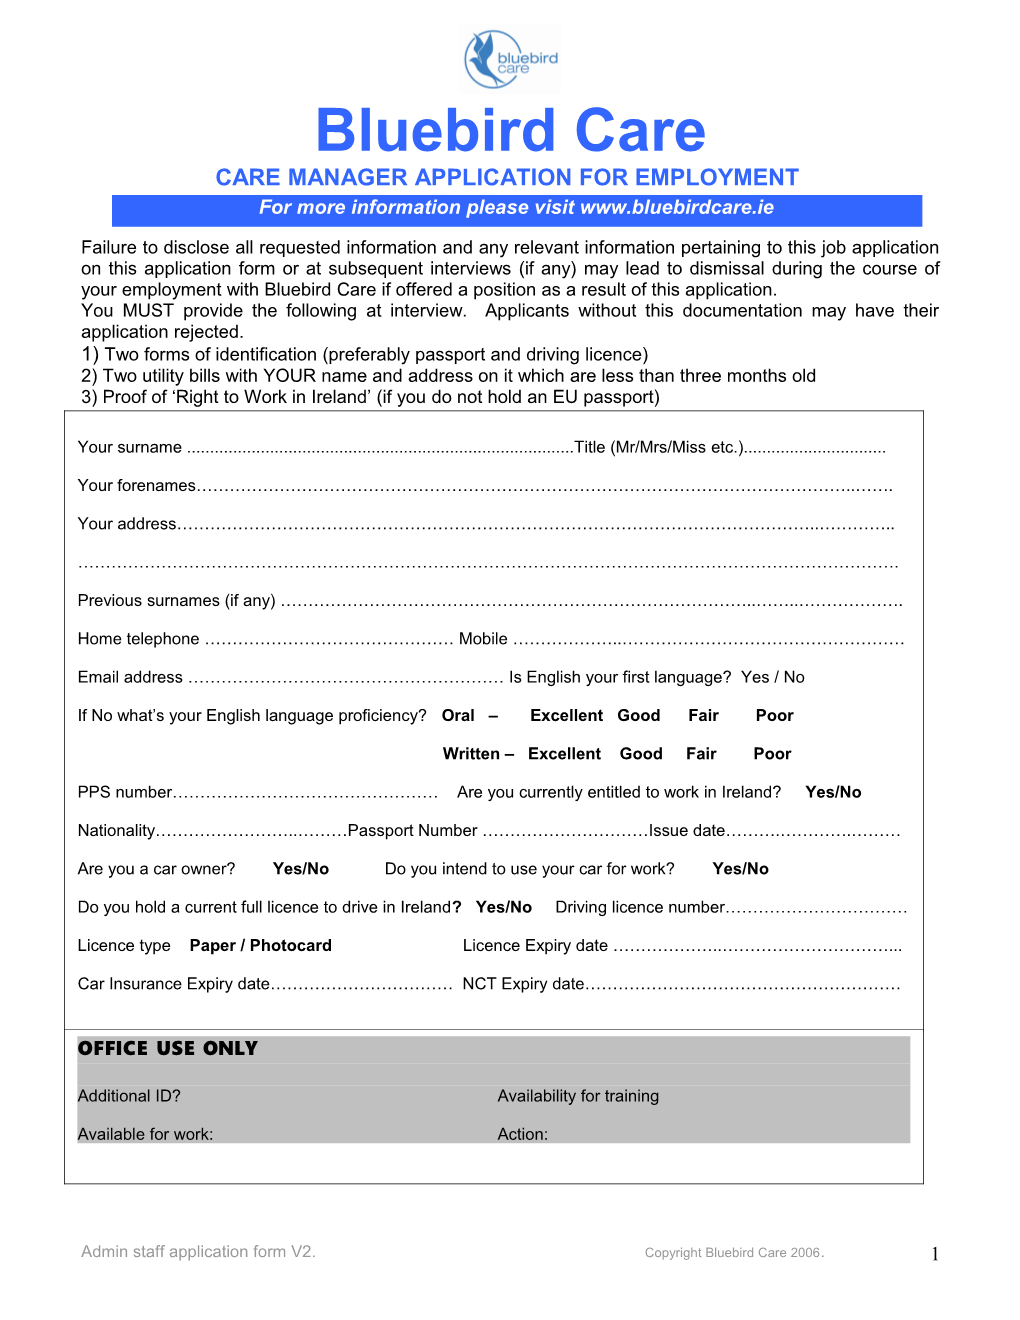 Care Manager Application for Employment